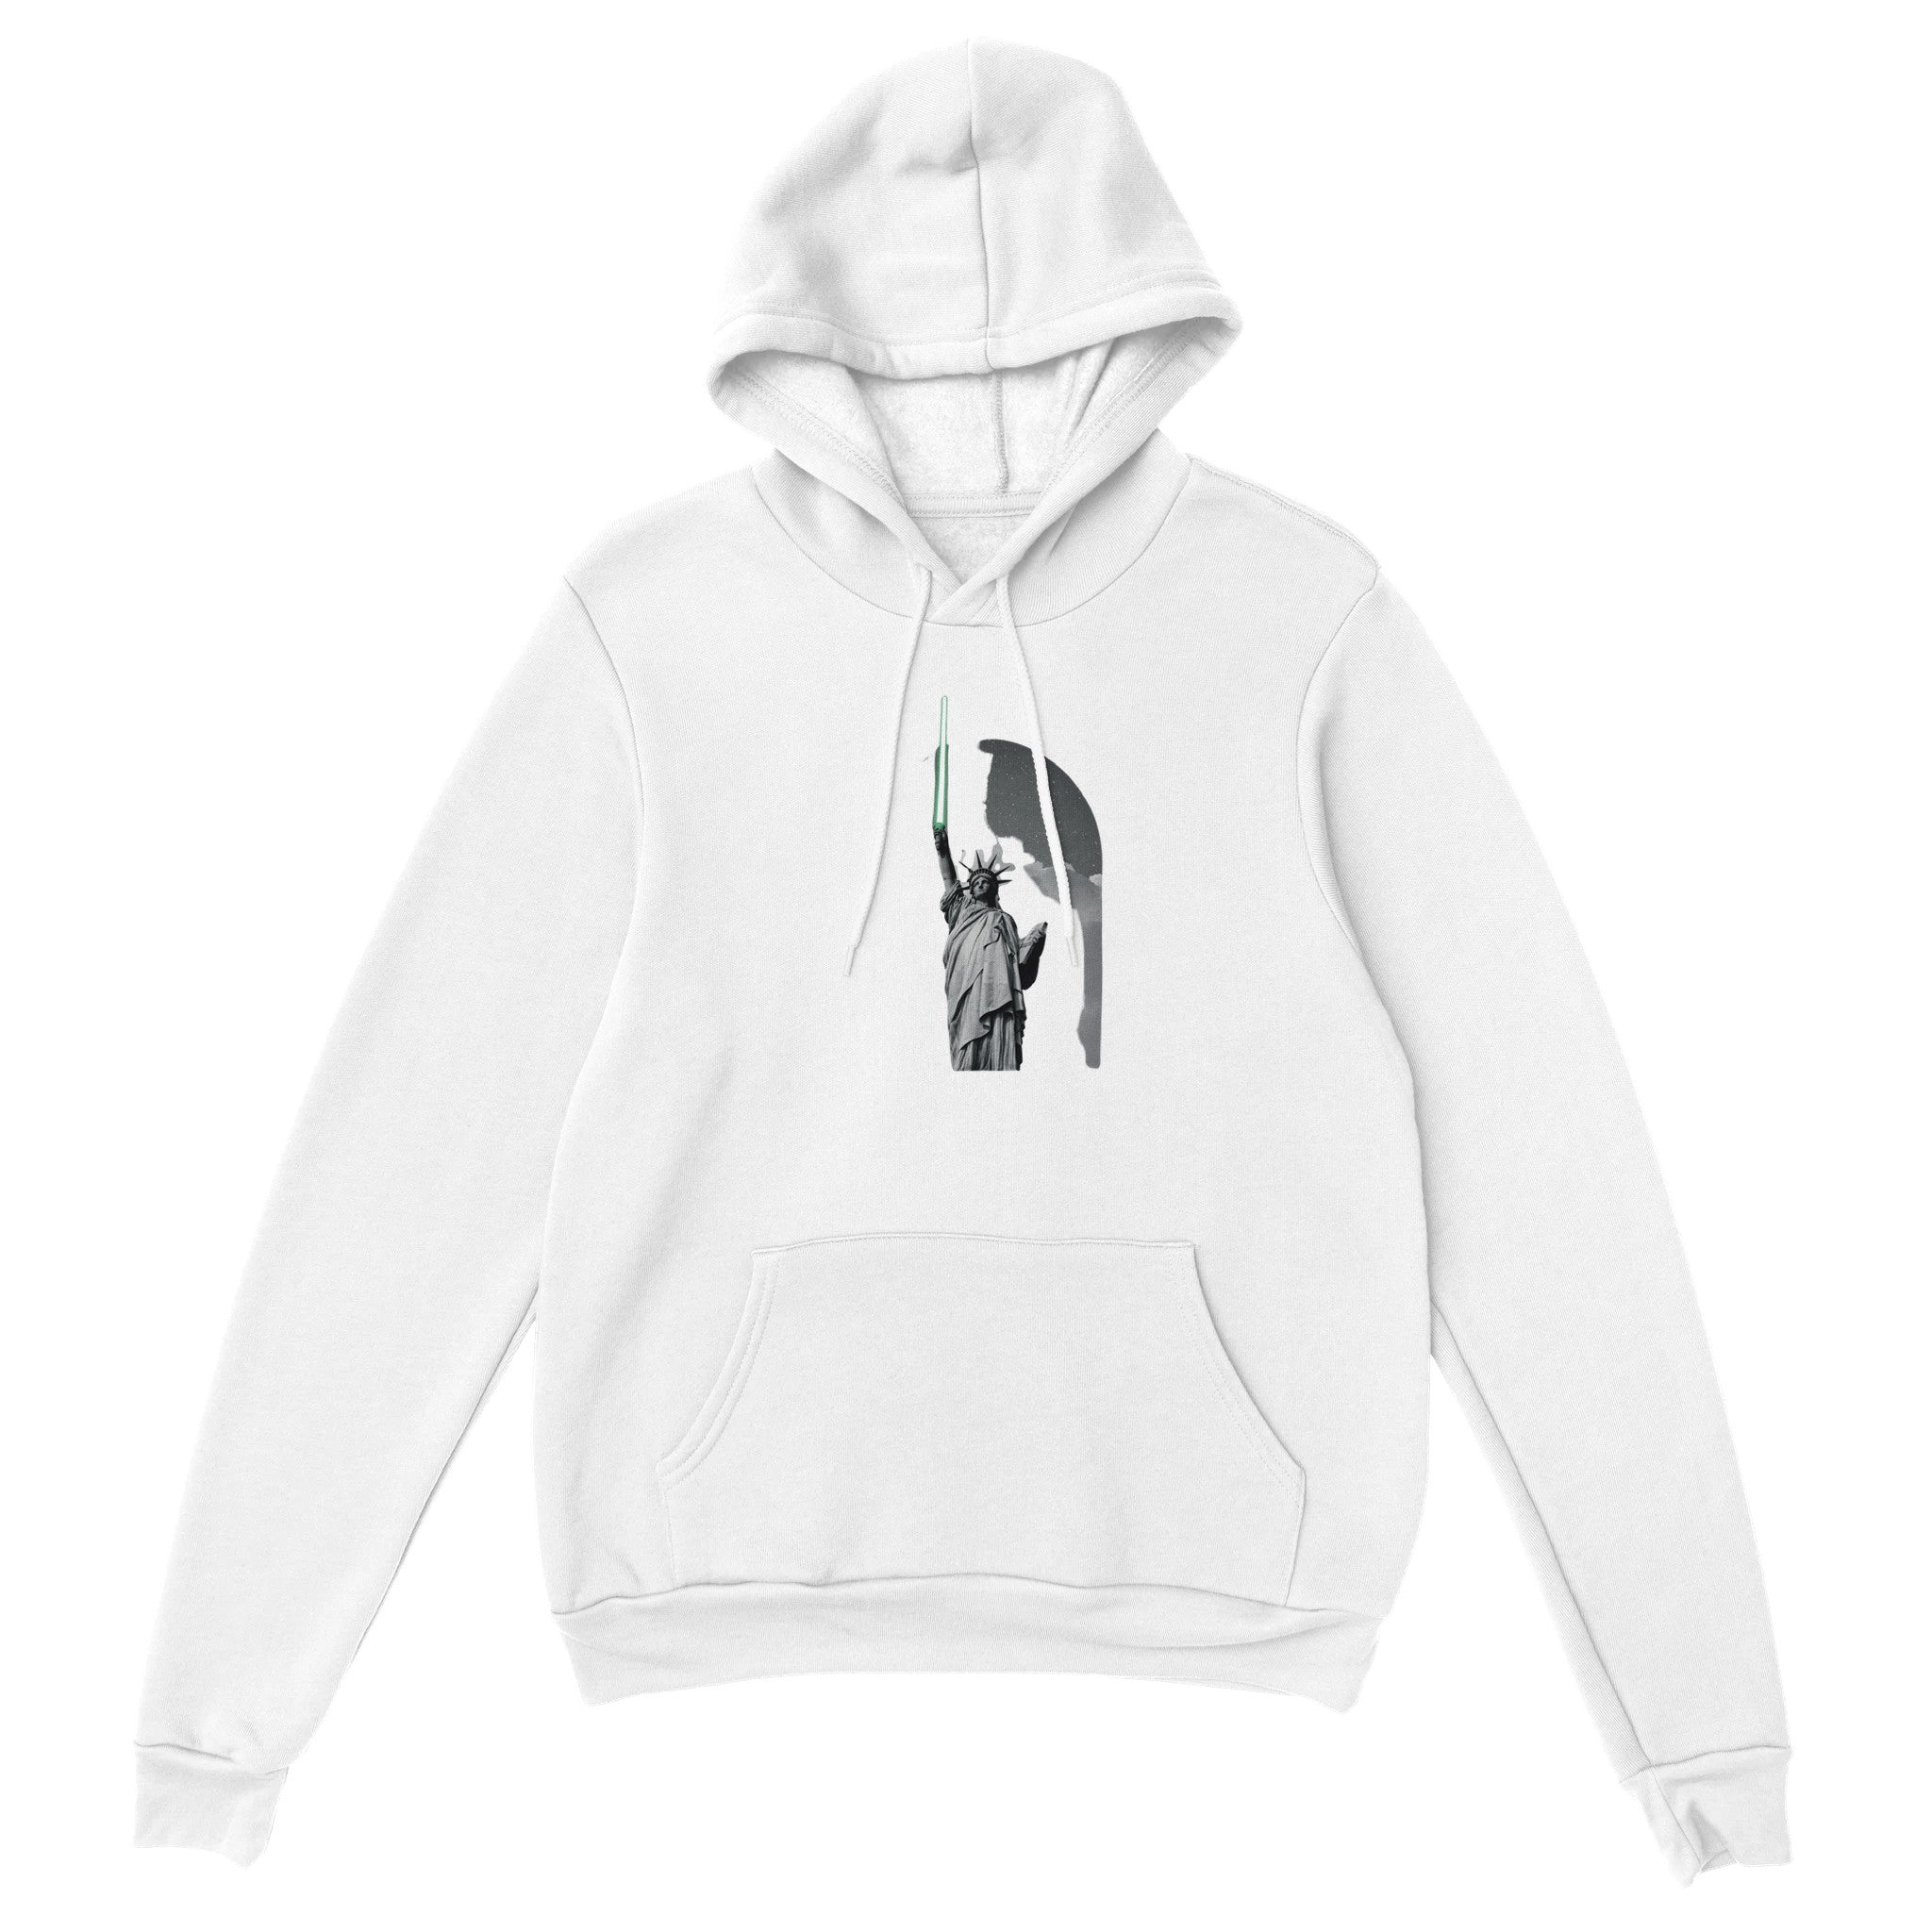 Statue Of The Force Pullover Hoodie - Optimalprint